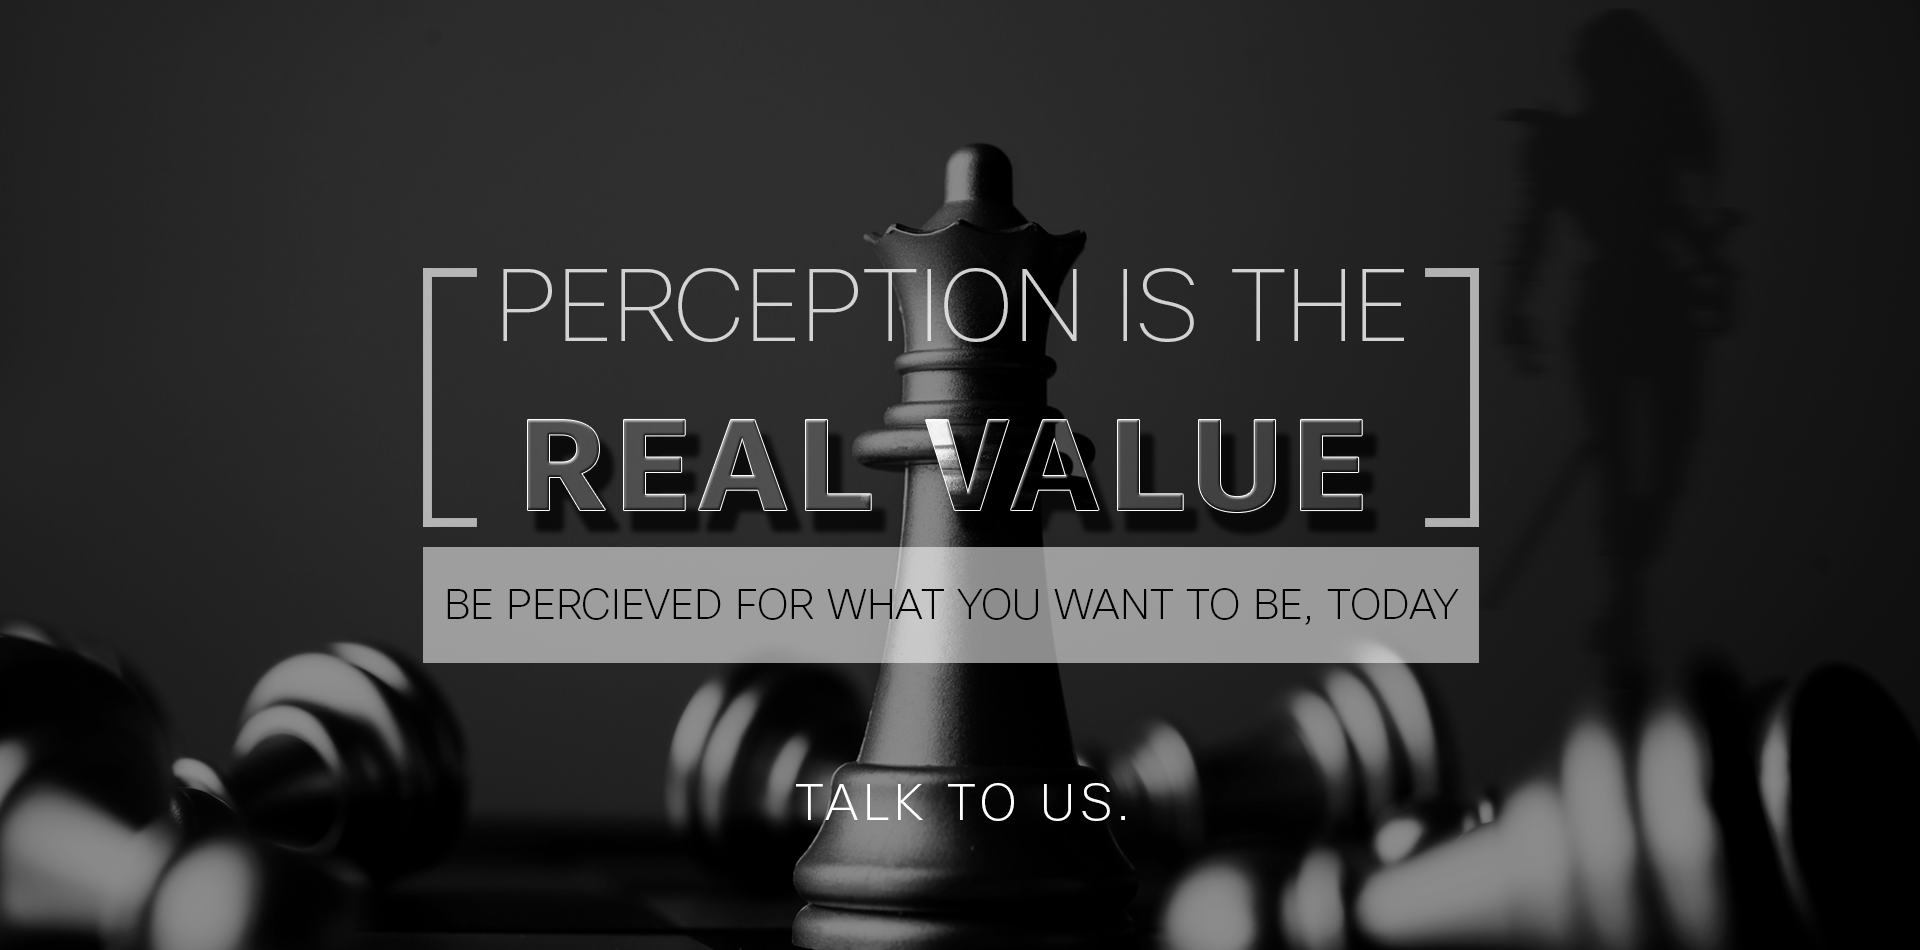 Perceptions is the real value.